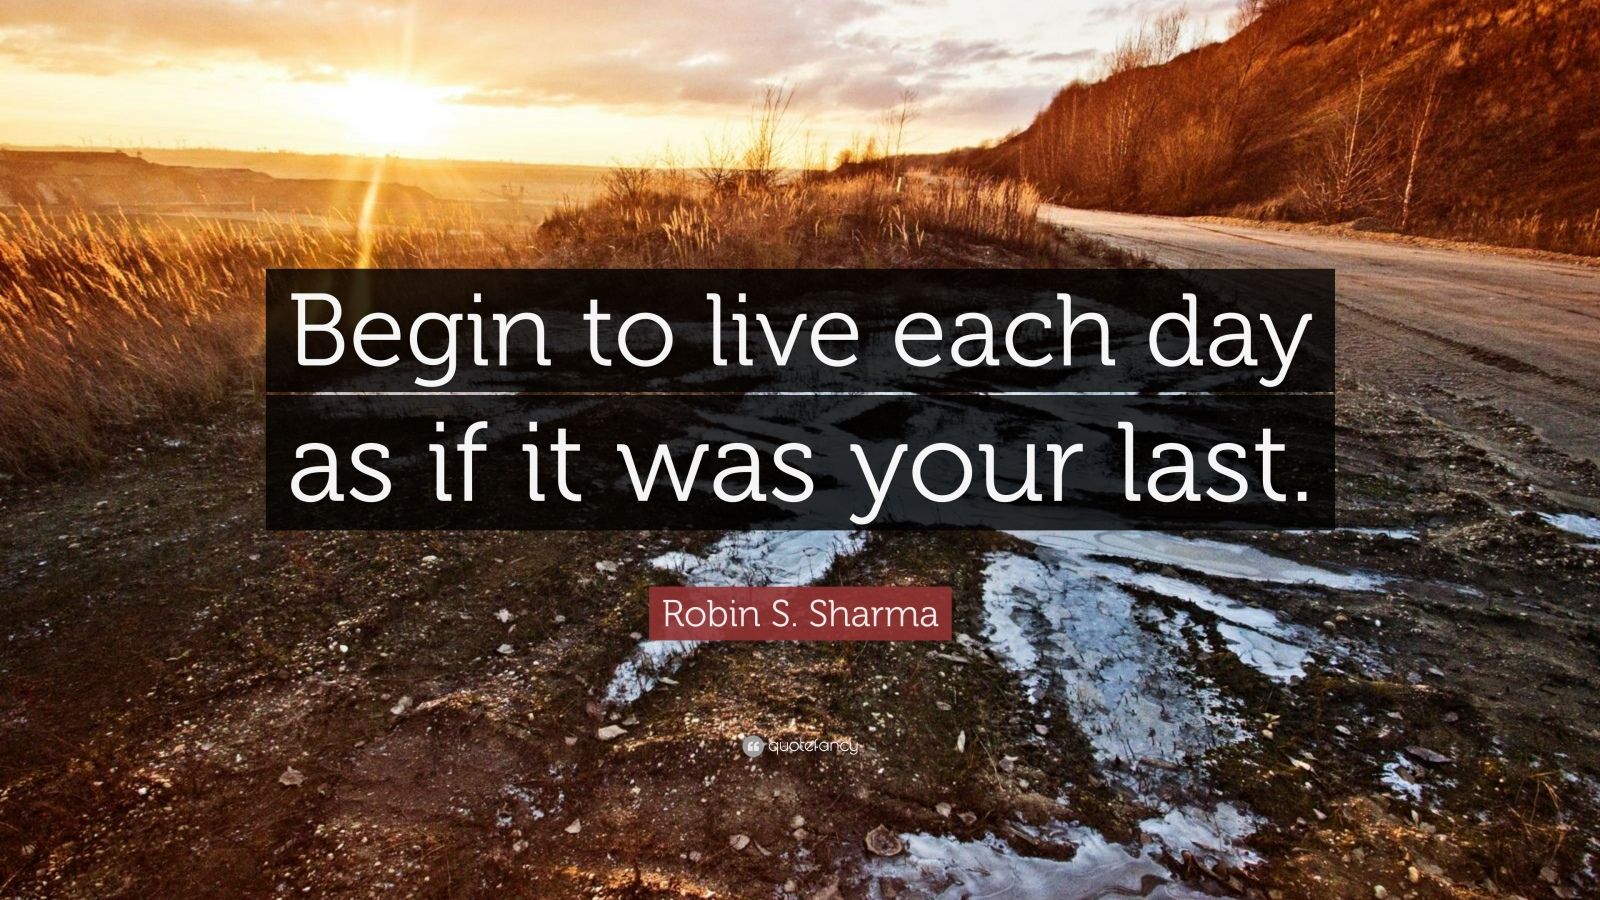 Robin S. Sharma Quote: “Begin to live each day as if it was your last ...